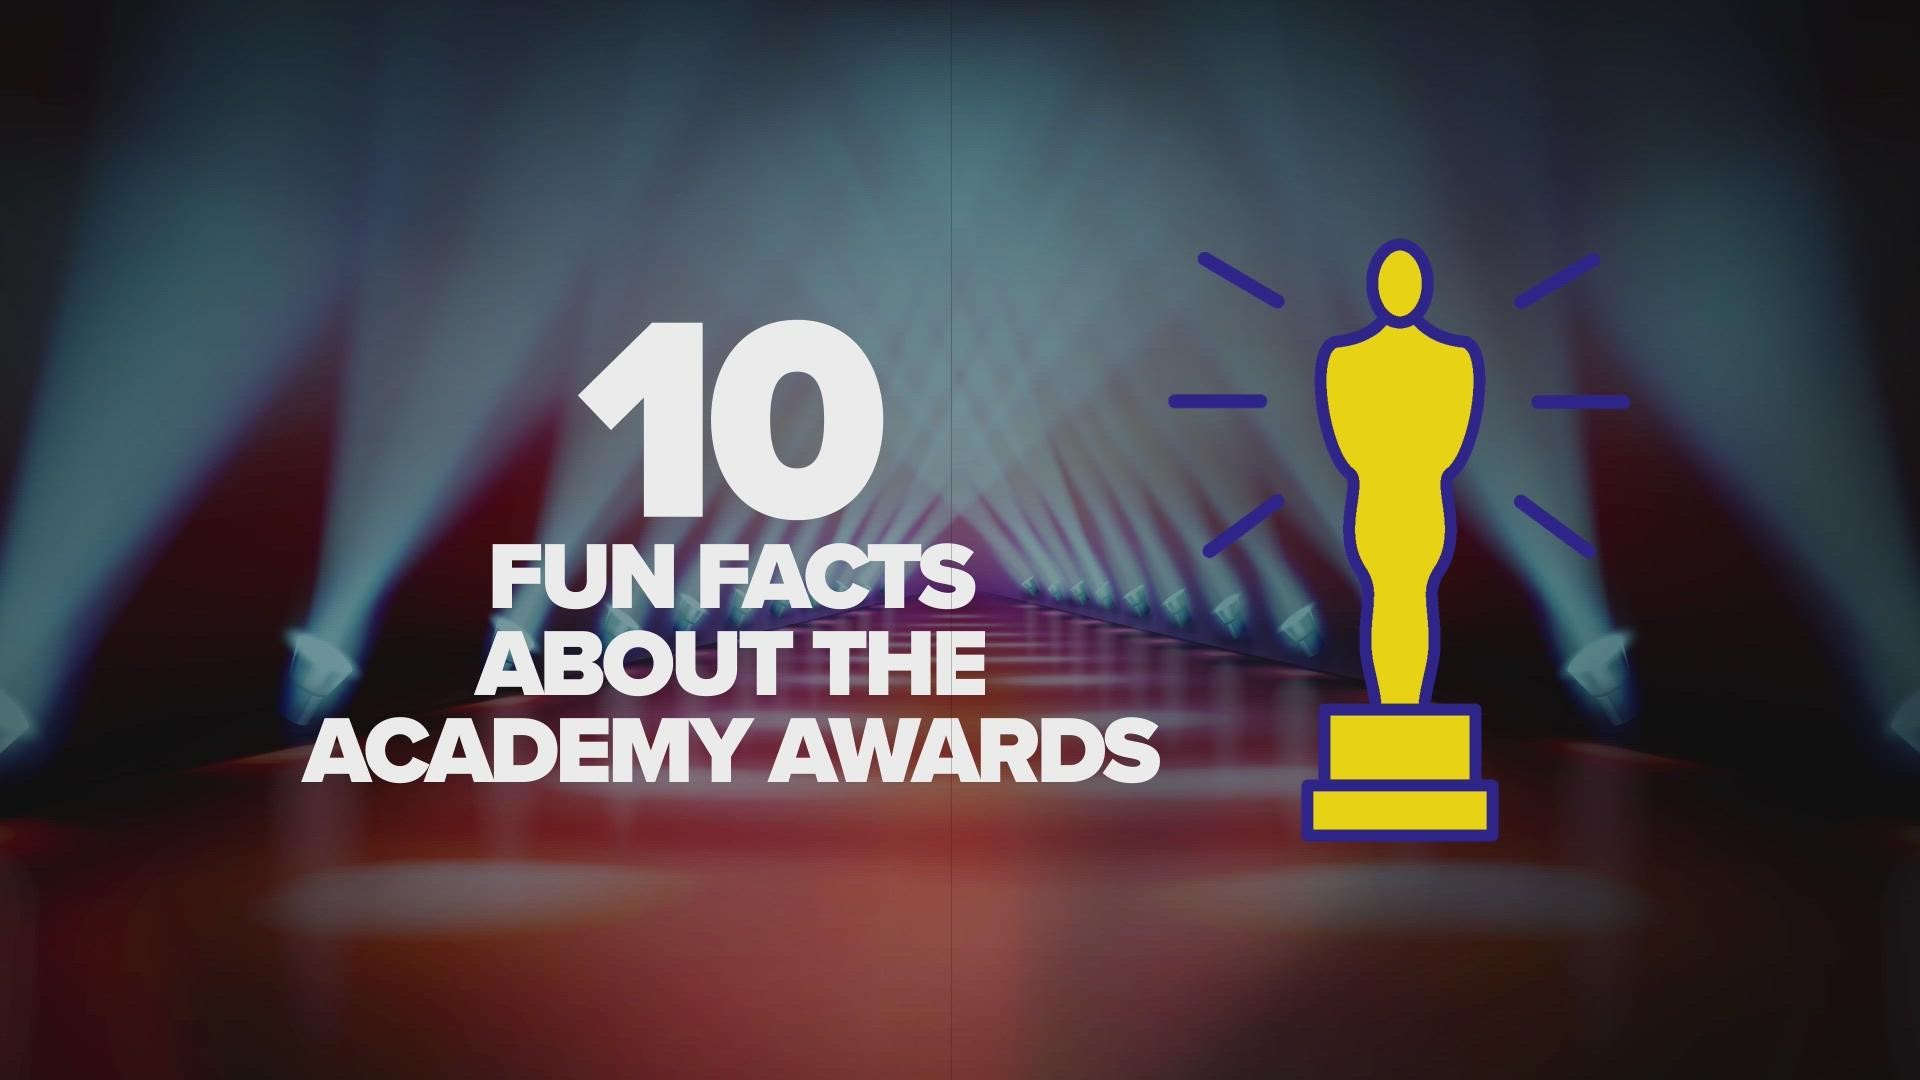 Brush up your Oscars knowledge with these 10 fun facts ahead of the 94th Academy Awards.